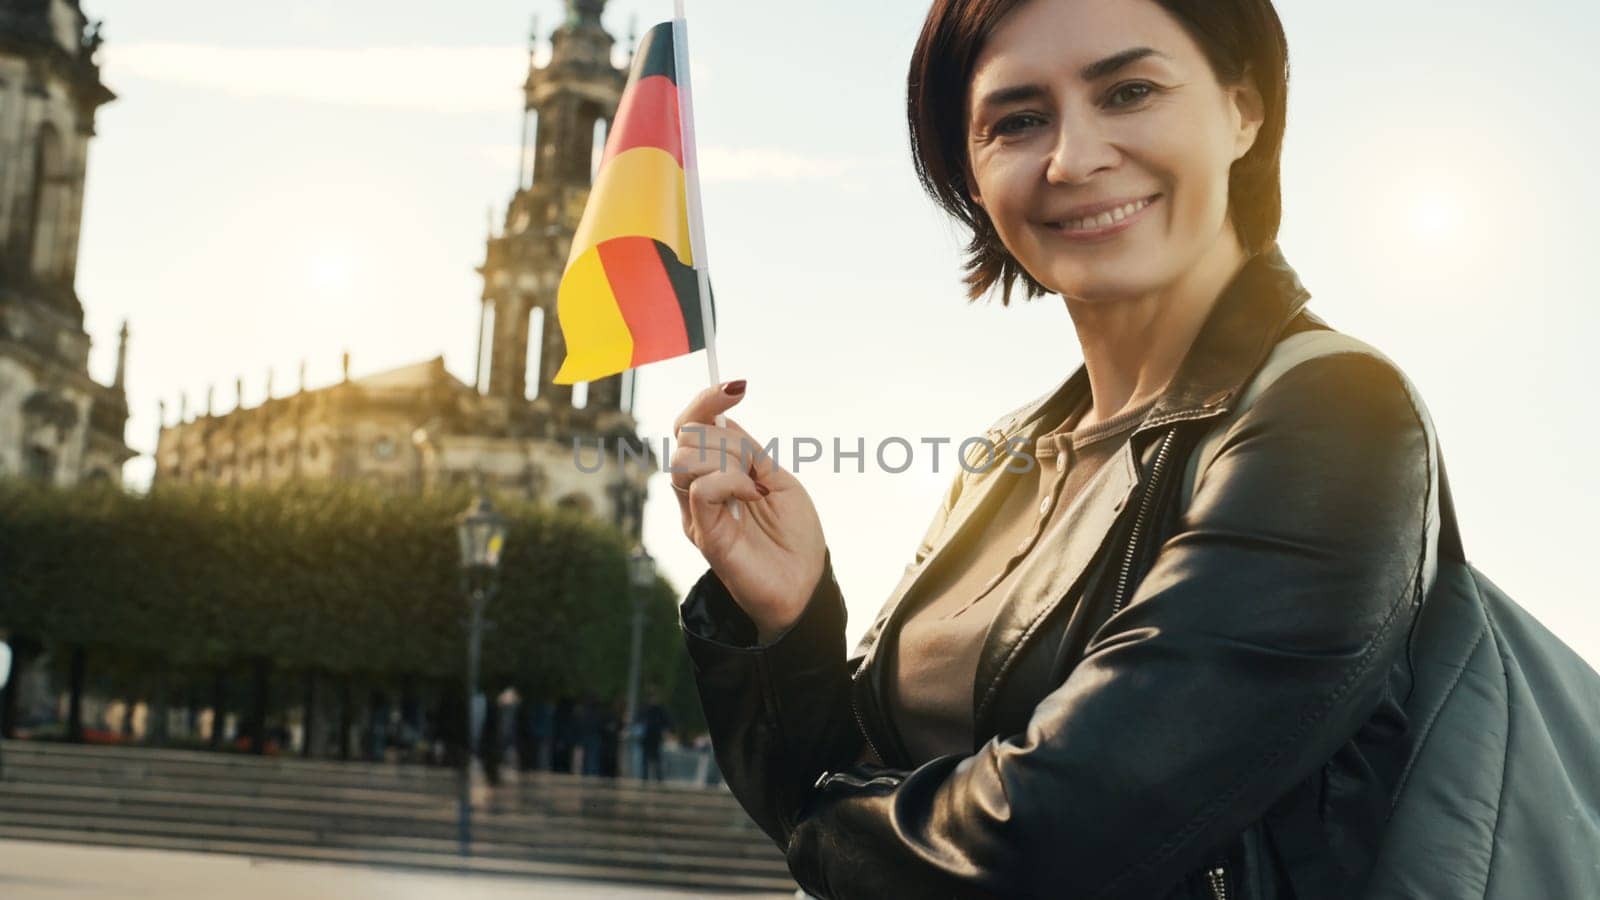 Young Woman Smiles With German Flag In Hand by tan4ikk1